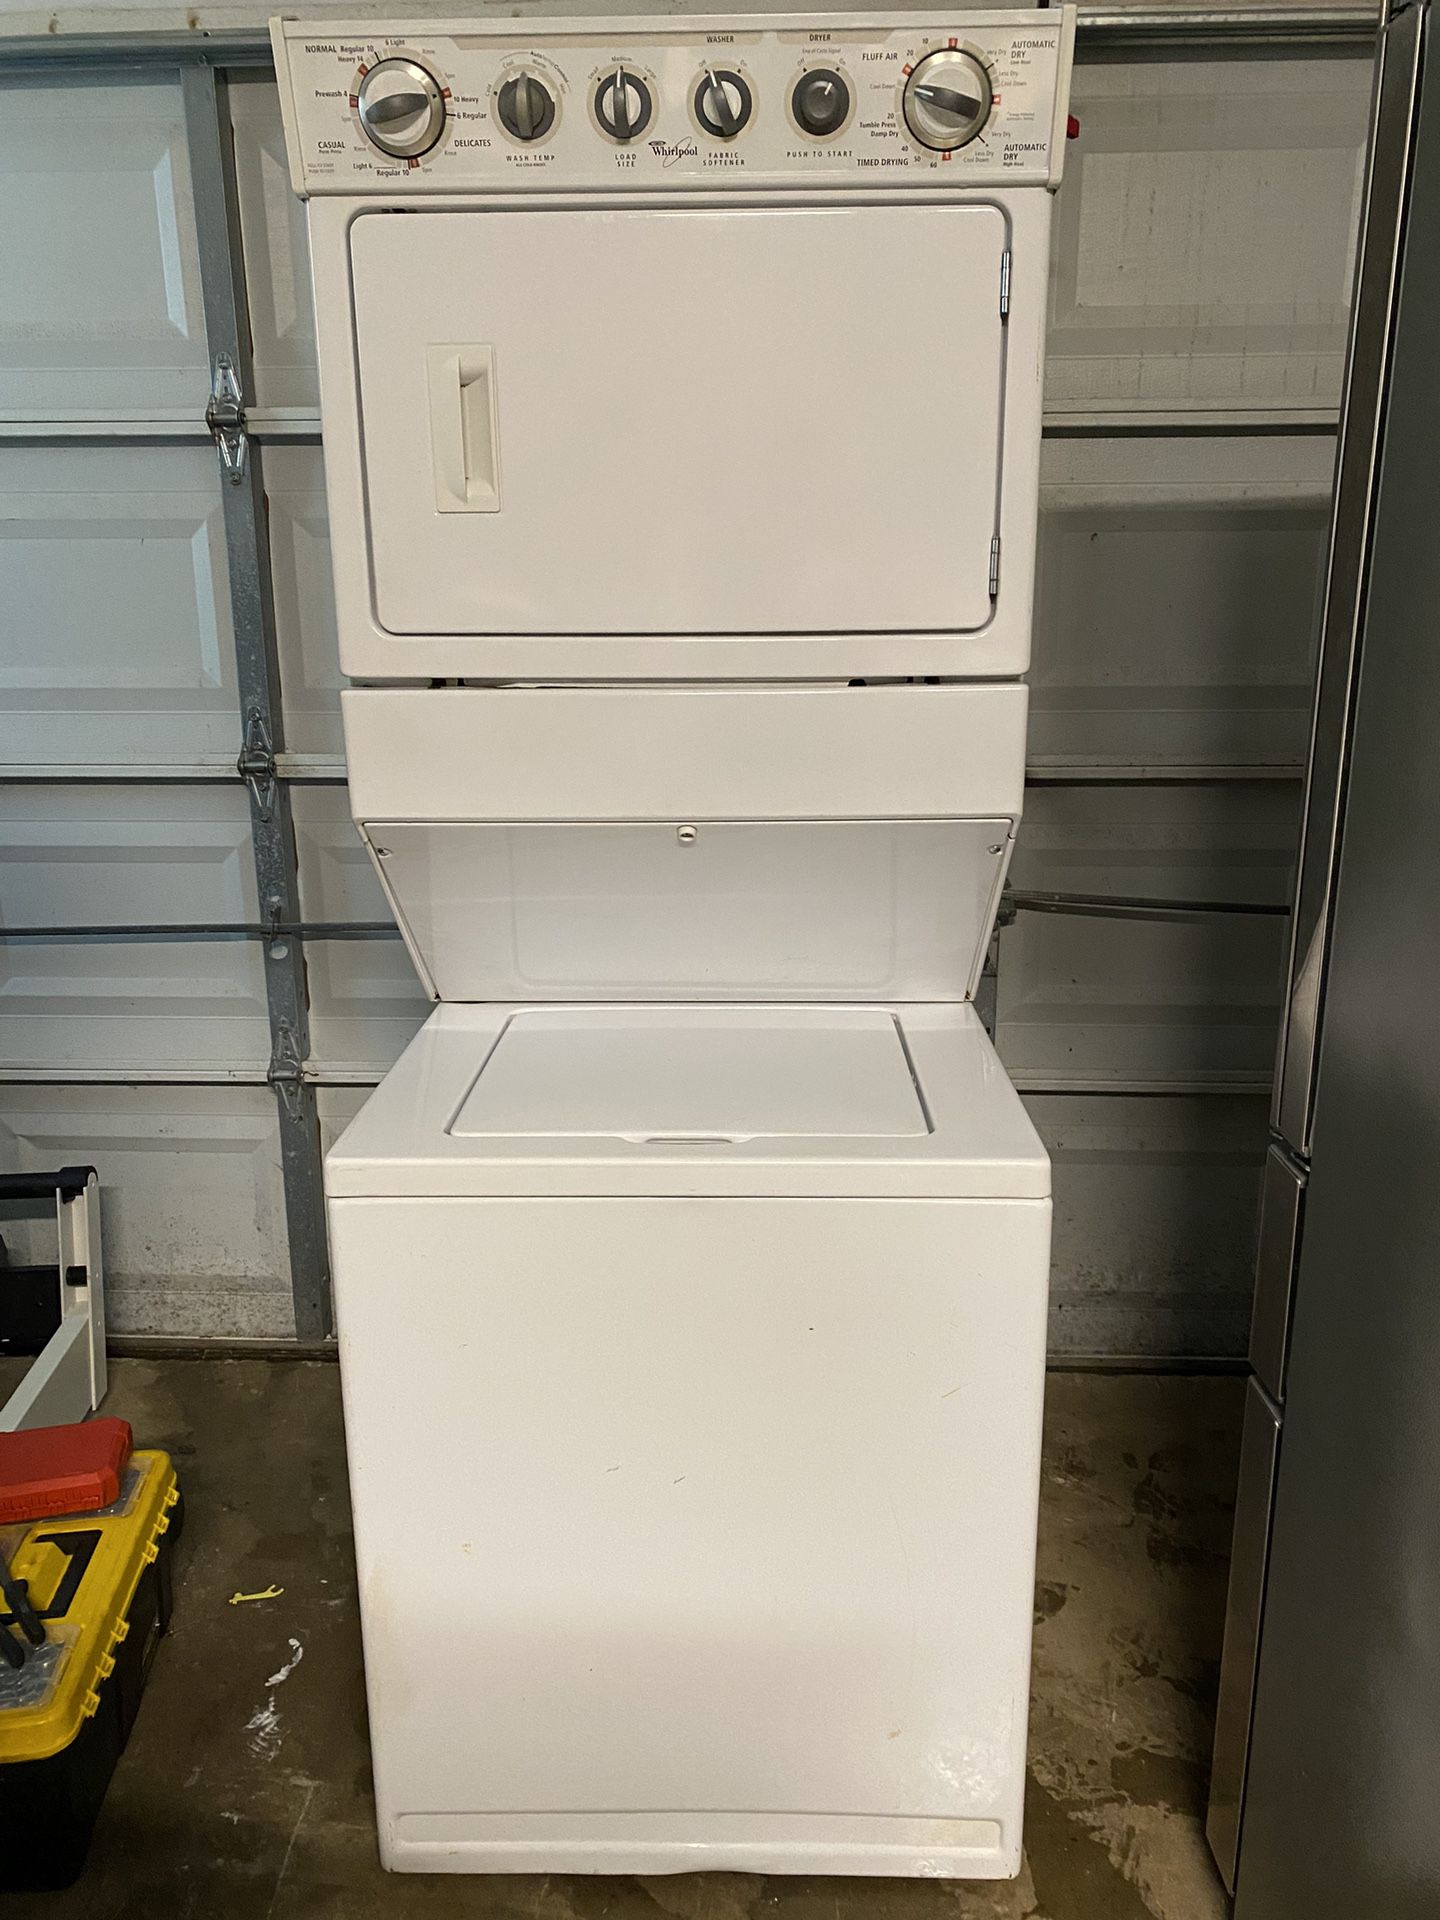 Electric Whirlpool Stackable Washer And Dryer . 